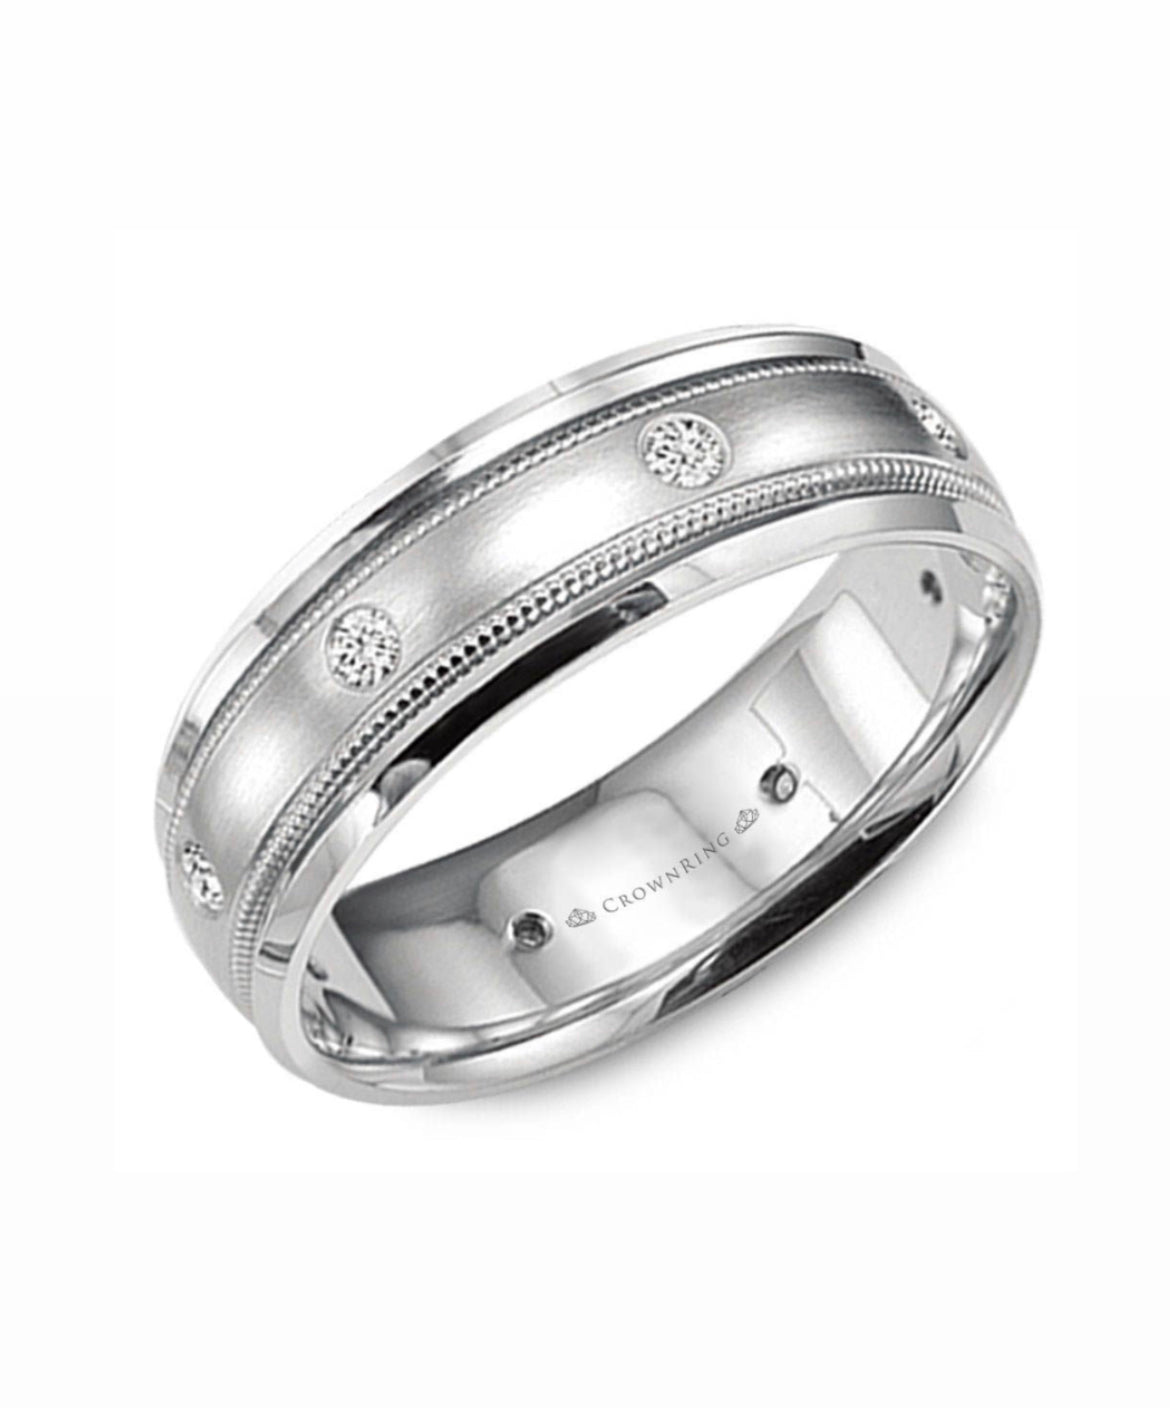 CrownRing Collection - 14k White Gold 8 mm Polished Band with .24 carat Diamonds